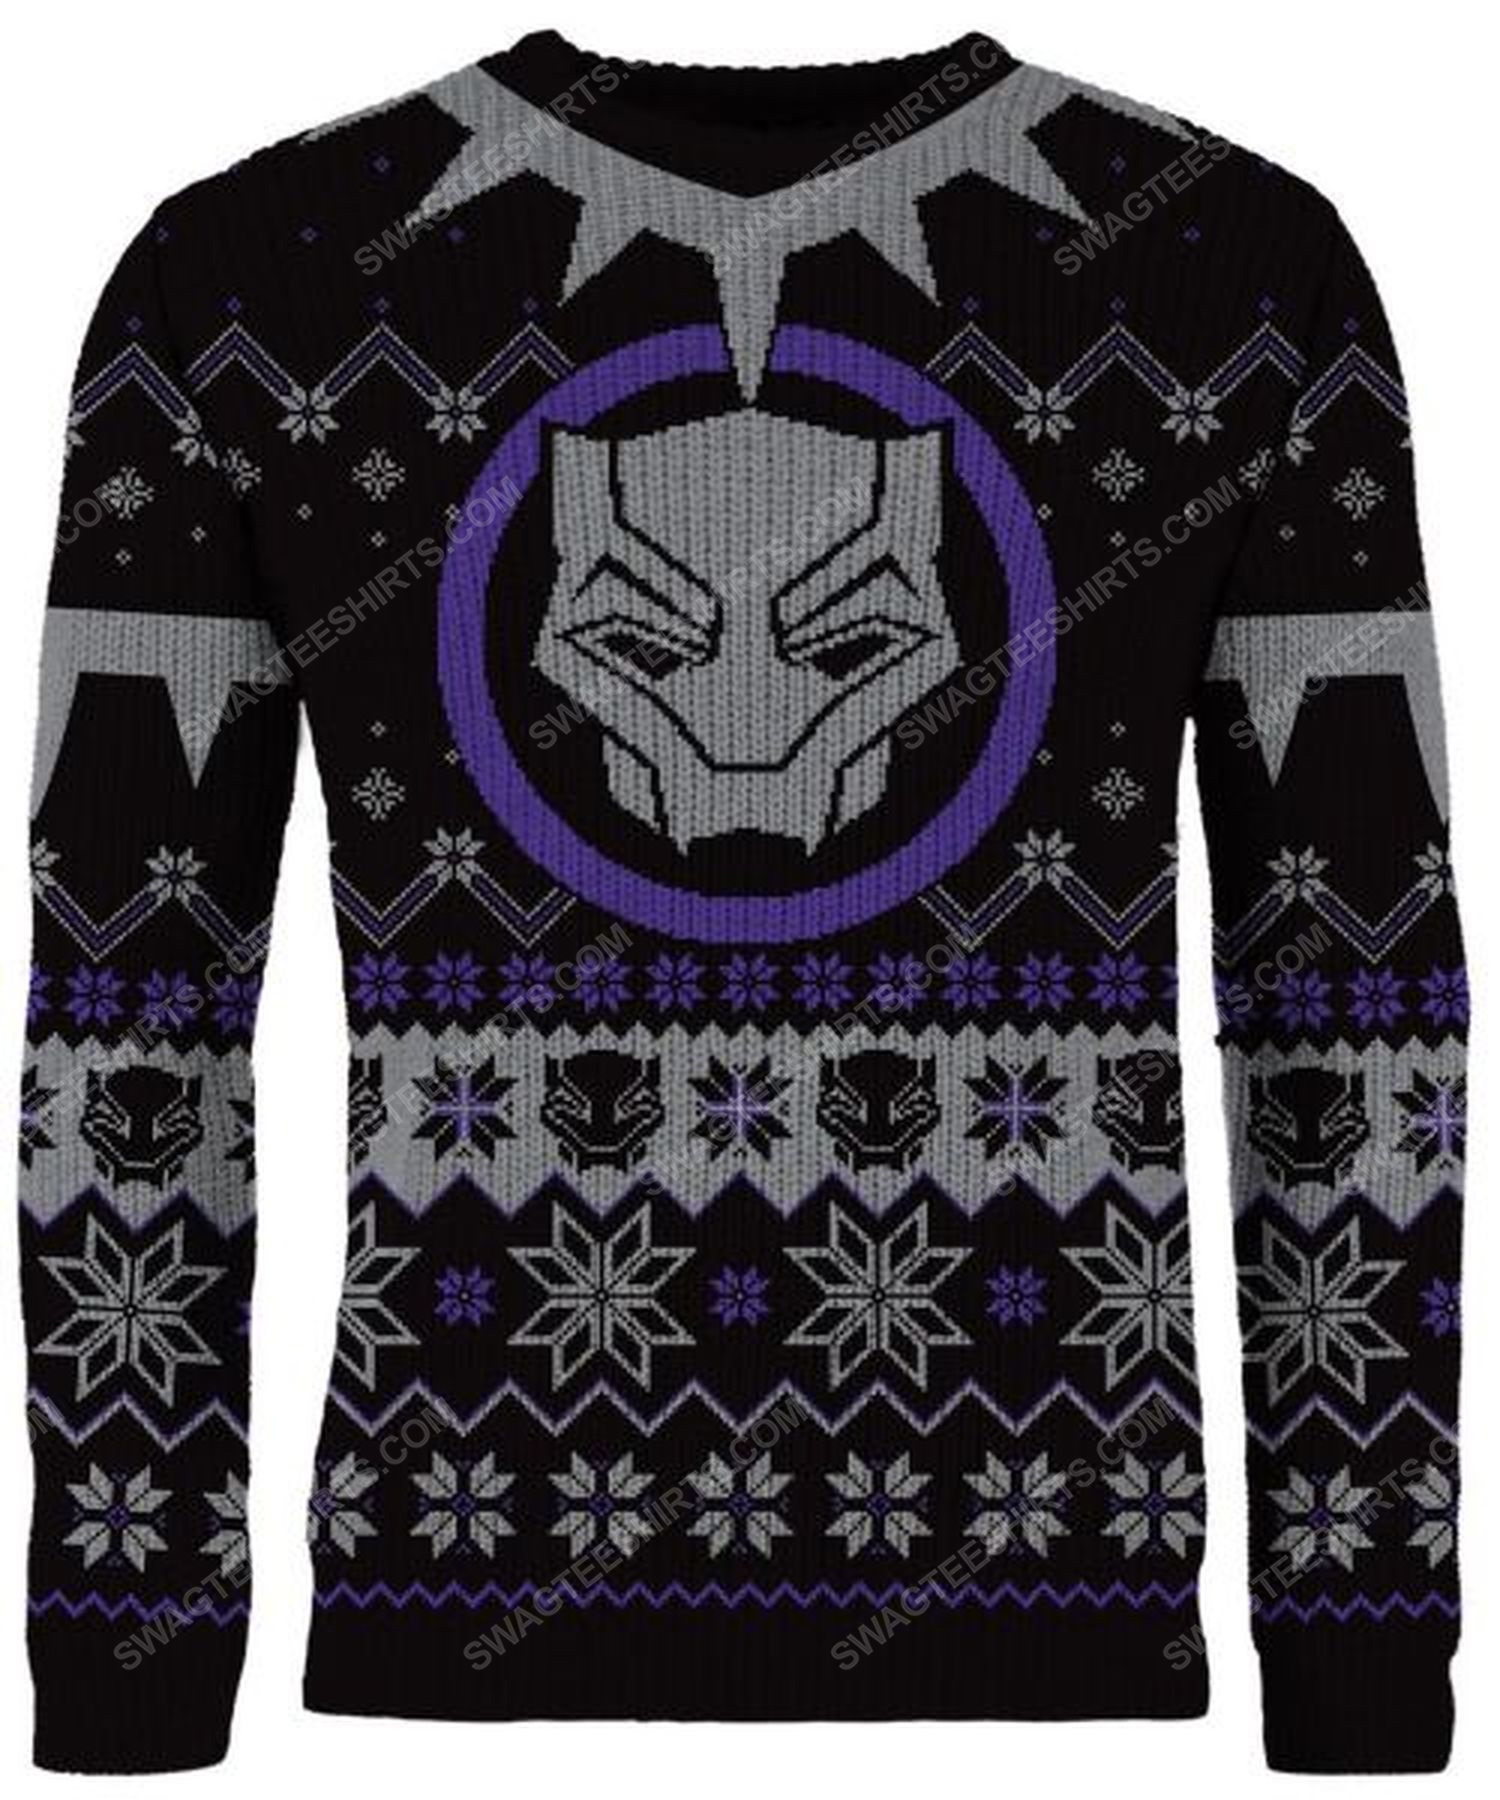 [special edition] Christmas holiday black panther full print ugly christmas sweater – maria